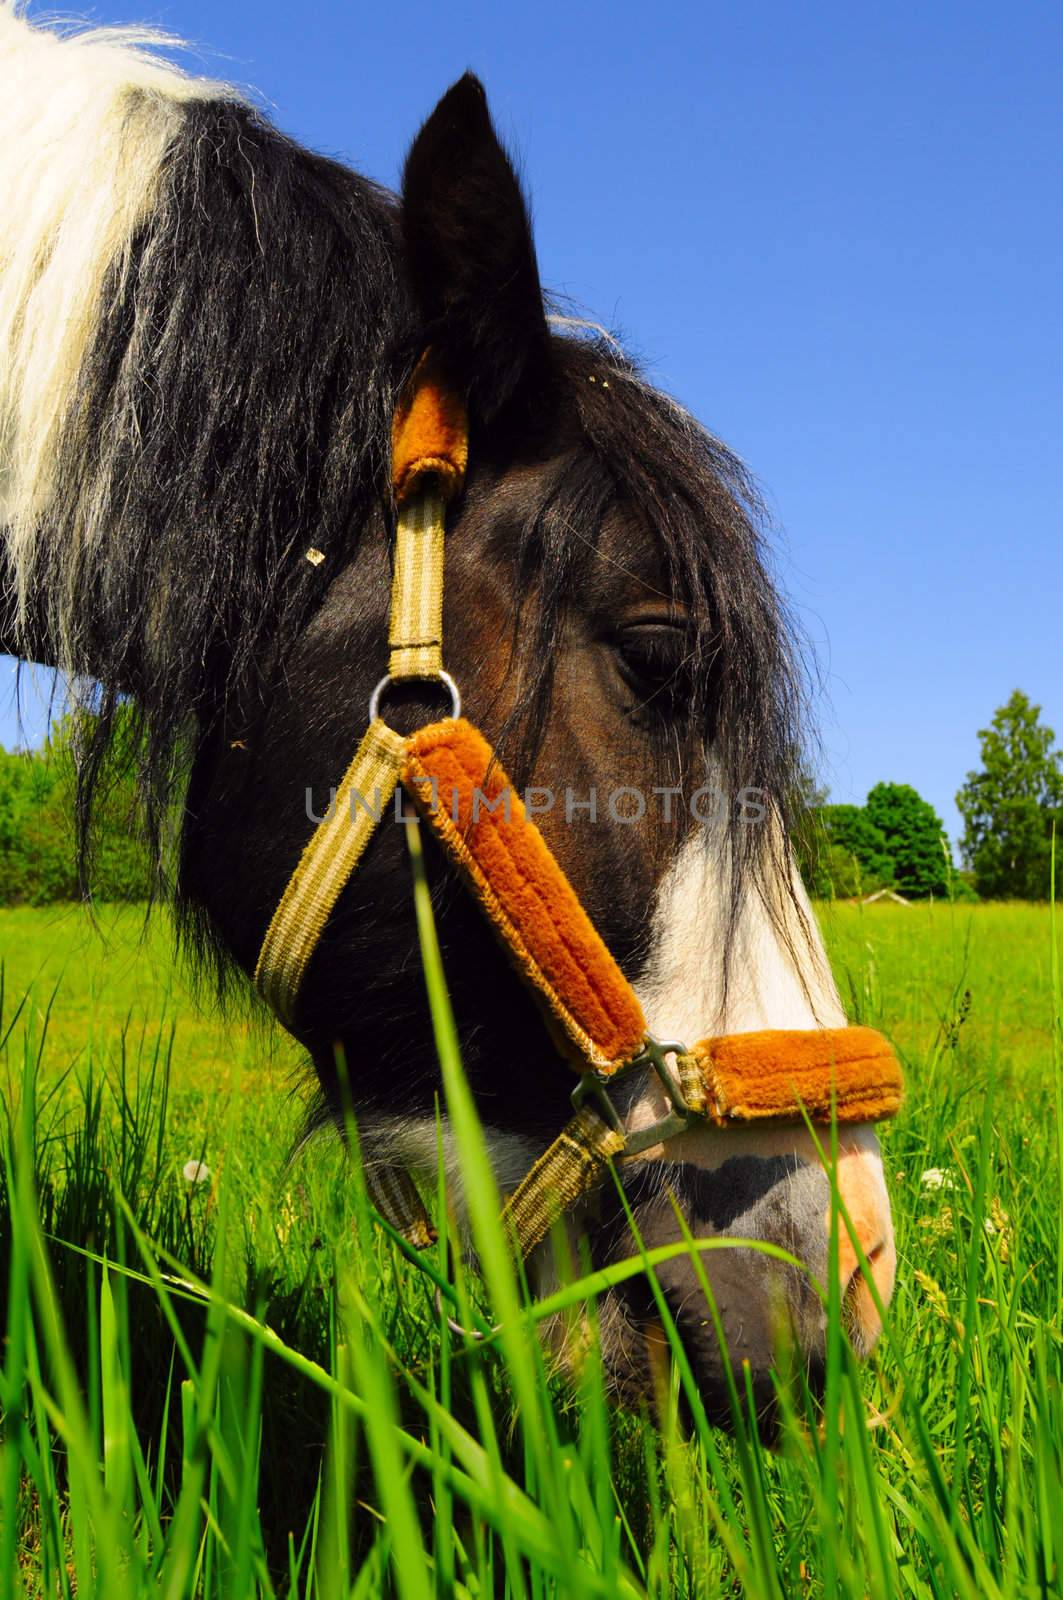 Grazing horse by Magnum